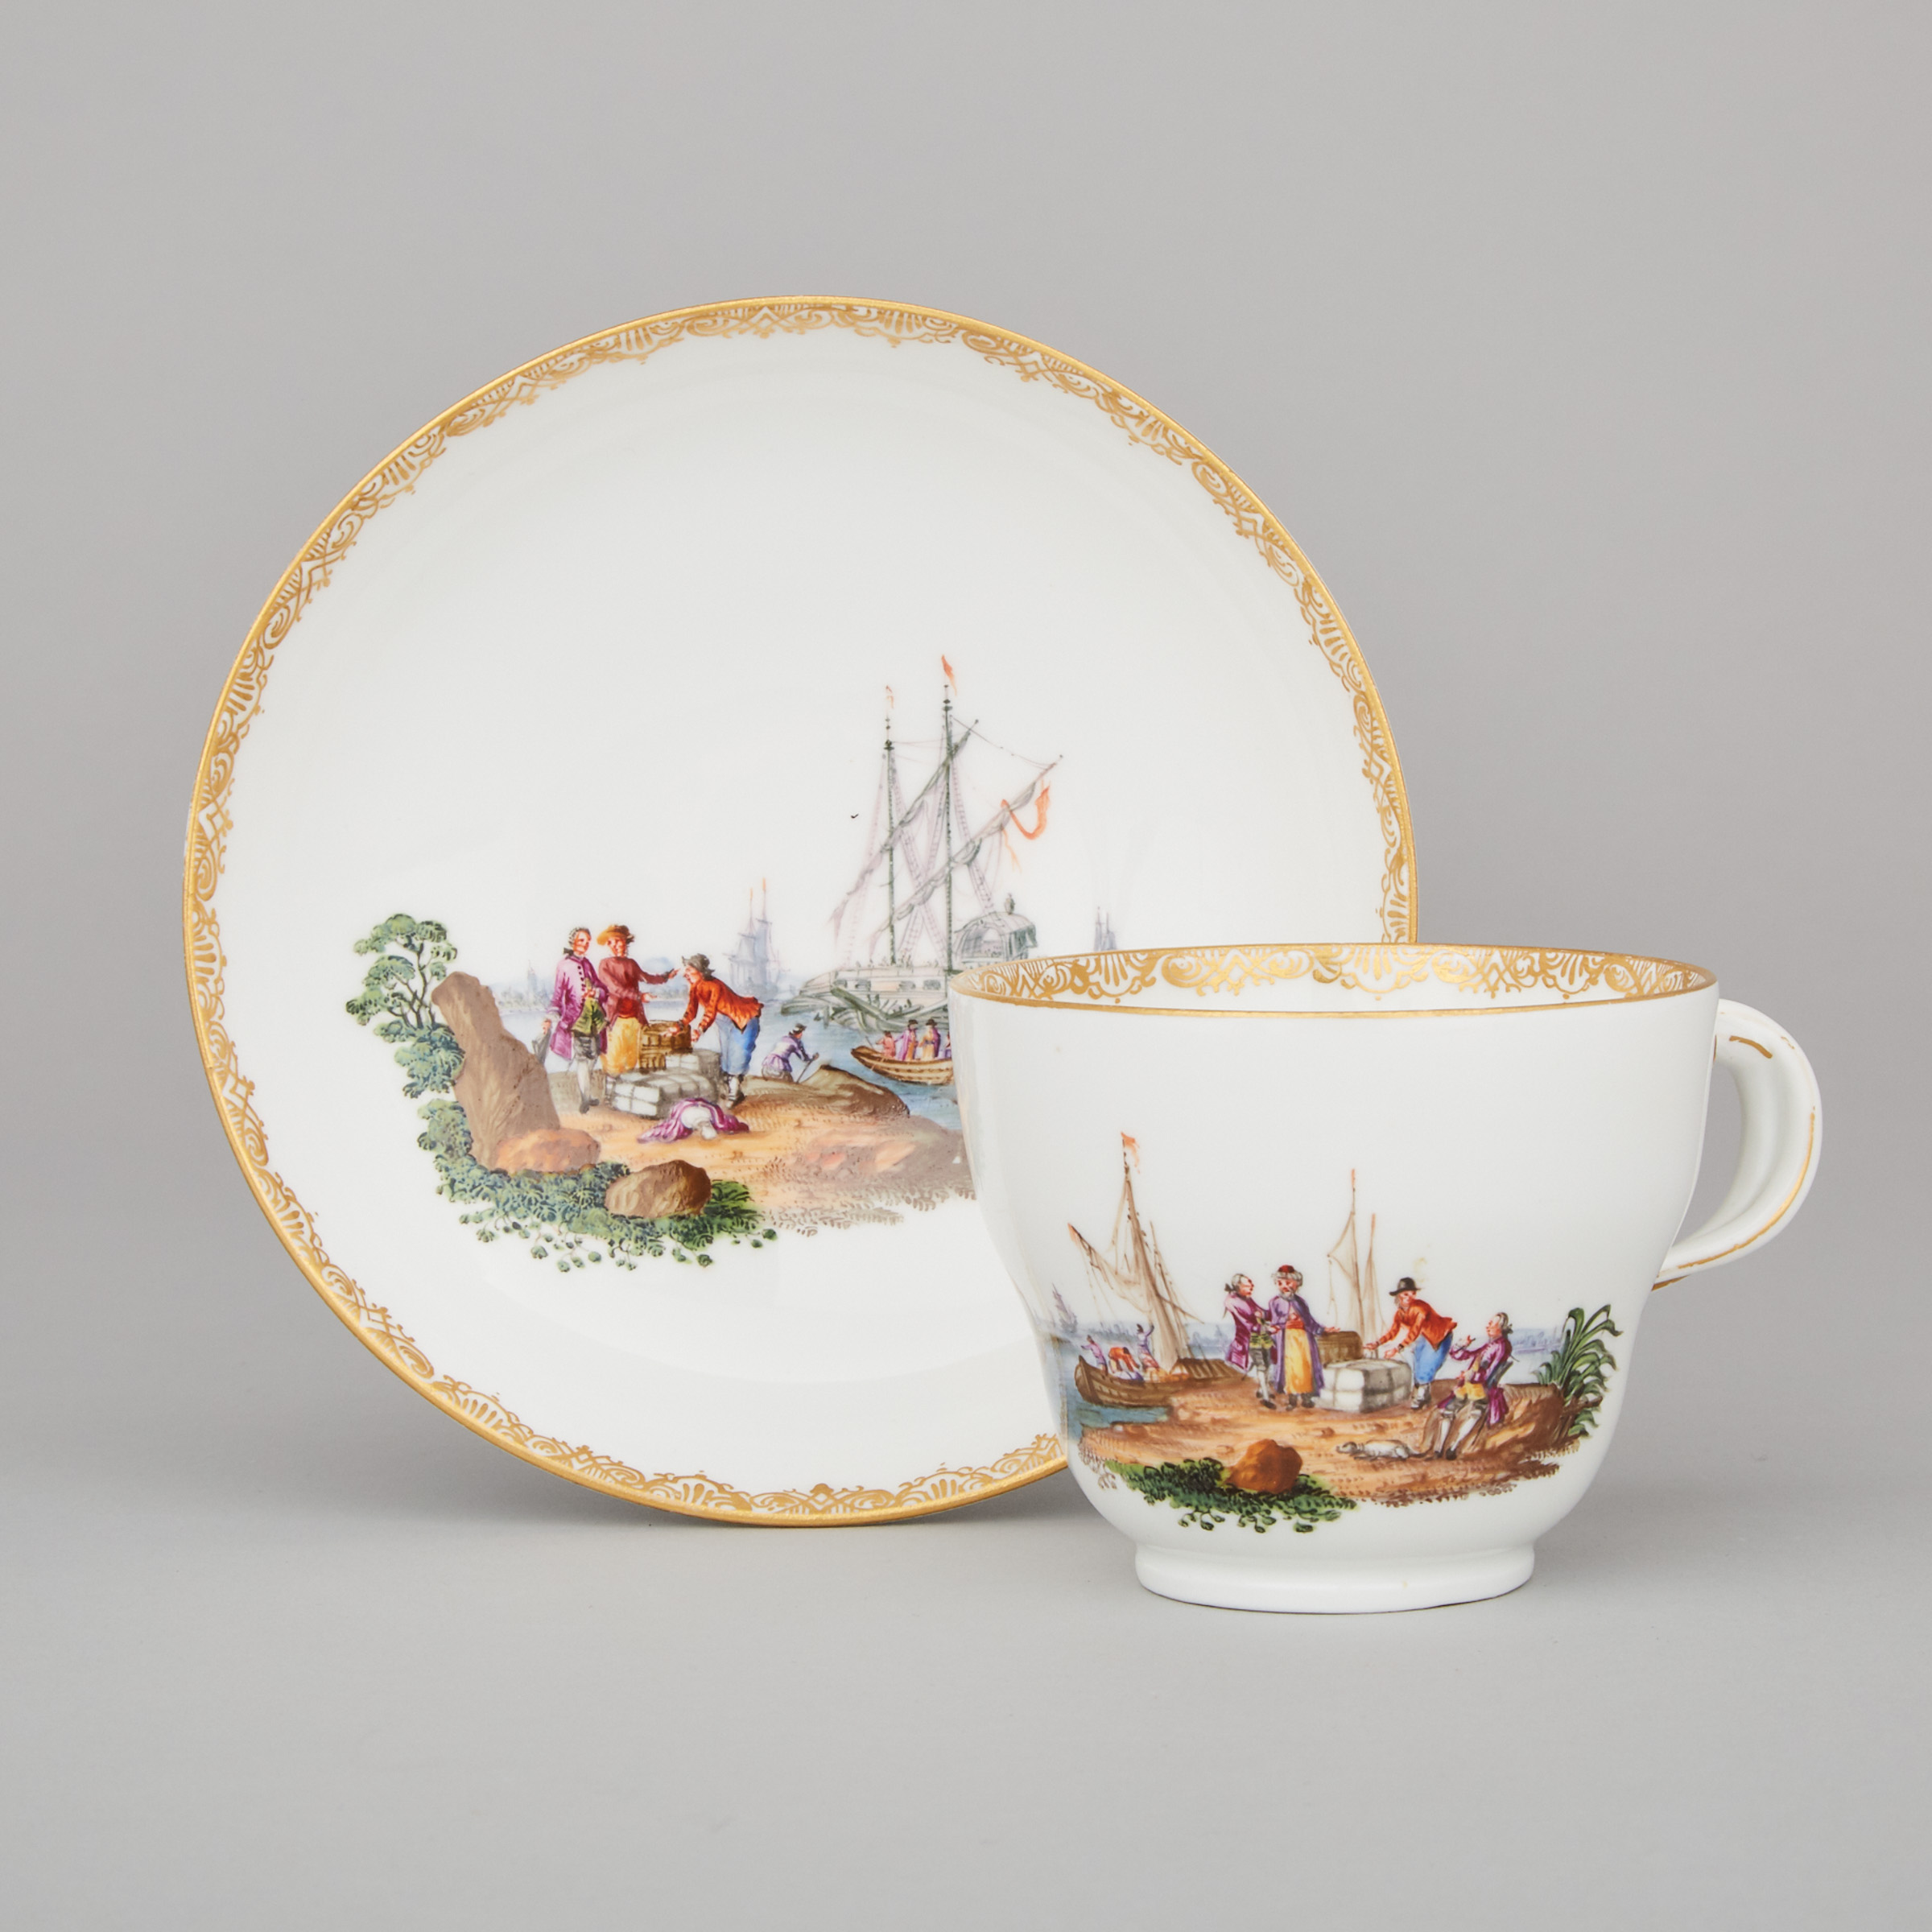 Meissen Cup and Saucer, 19th century